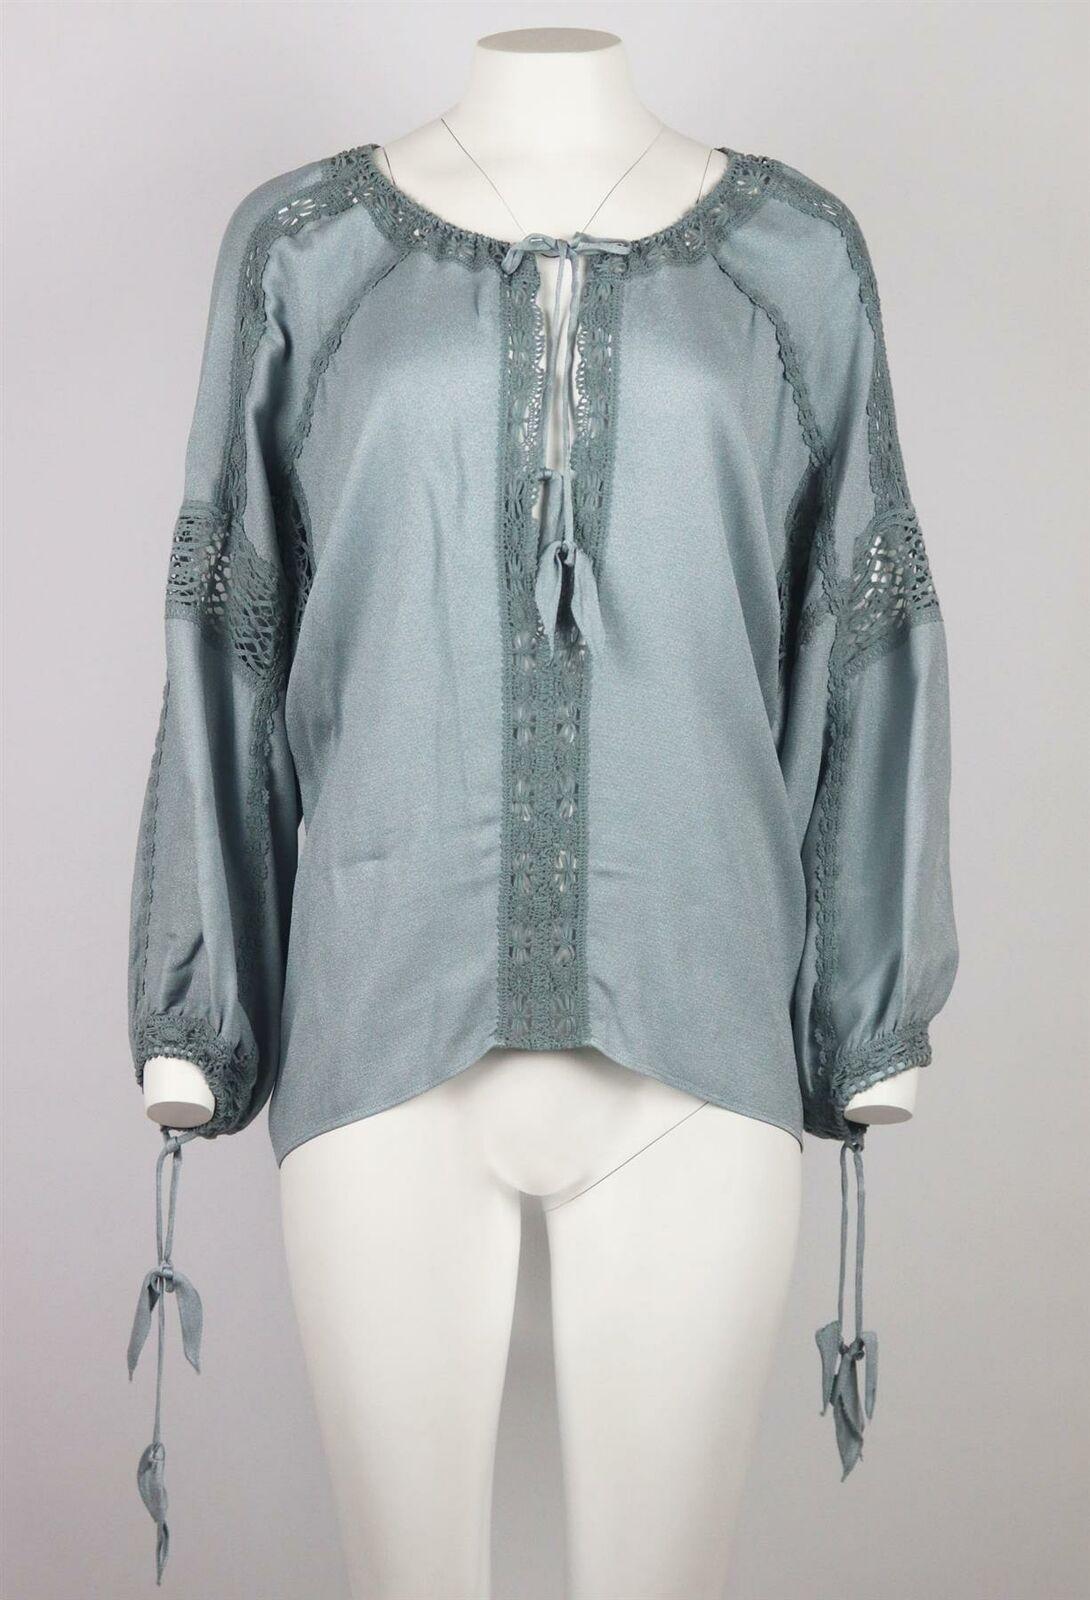 Etro's blue crepe de chine blouse was made in Italy; it is loose fitted and is finished with cotton-blend lace trims throughout and tie fastening around the neck and cuffs.
Blue crepe de chine.
Slips on.
100% Viscose; trim: 100% cotton.

Size: IT 42